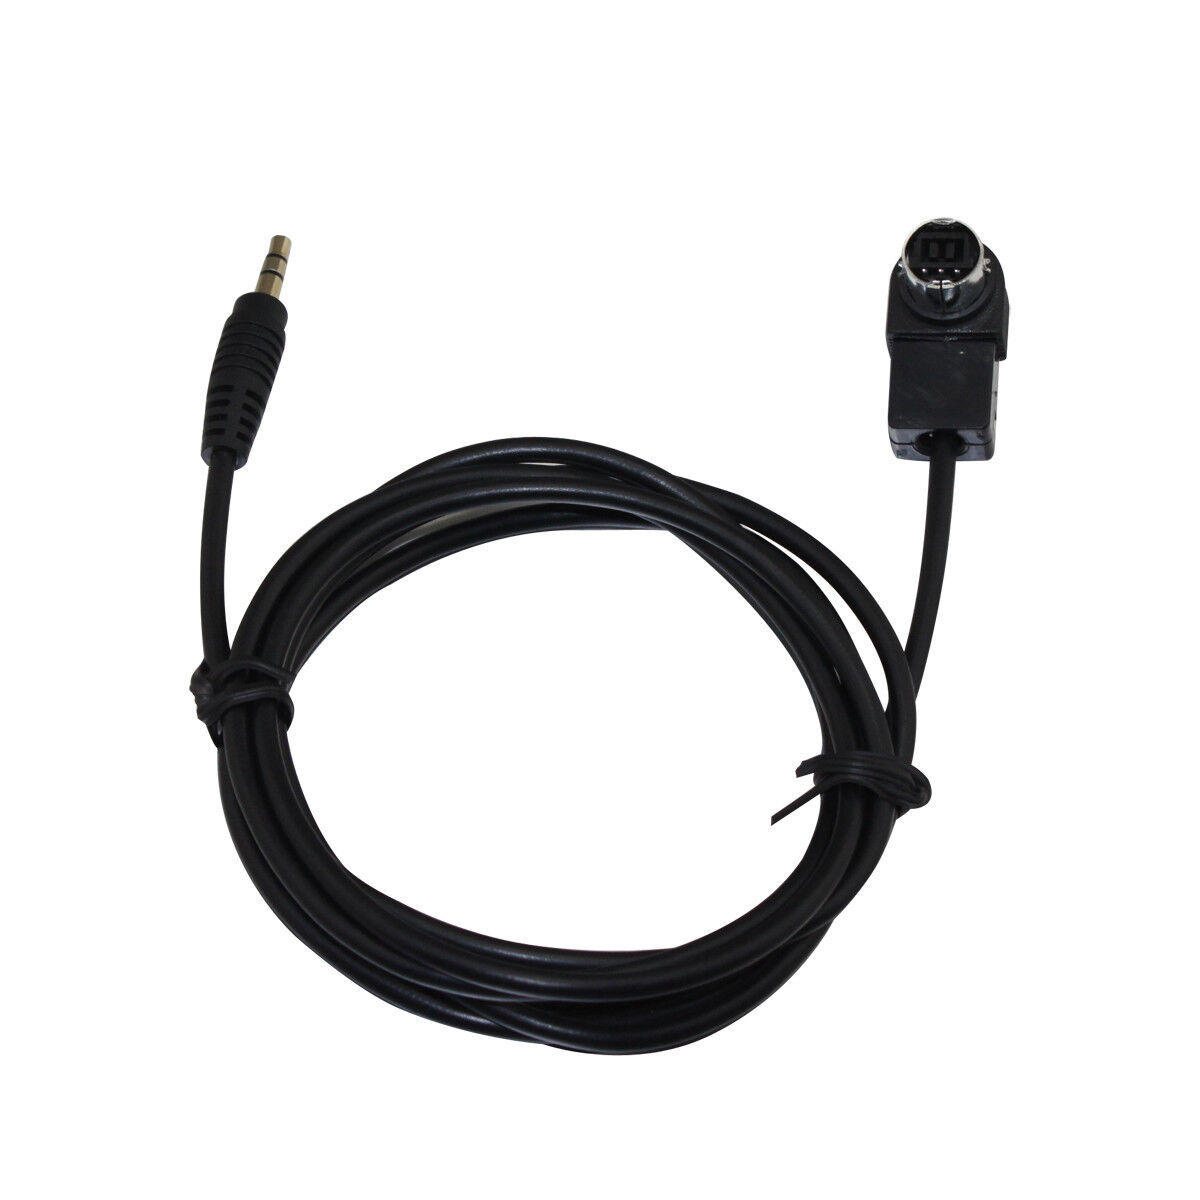 Primary image for Car Audio Cable For Sony 3.5Mm Audio Aux Input Ipod Mp3 Sony-3.5Mm